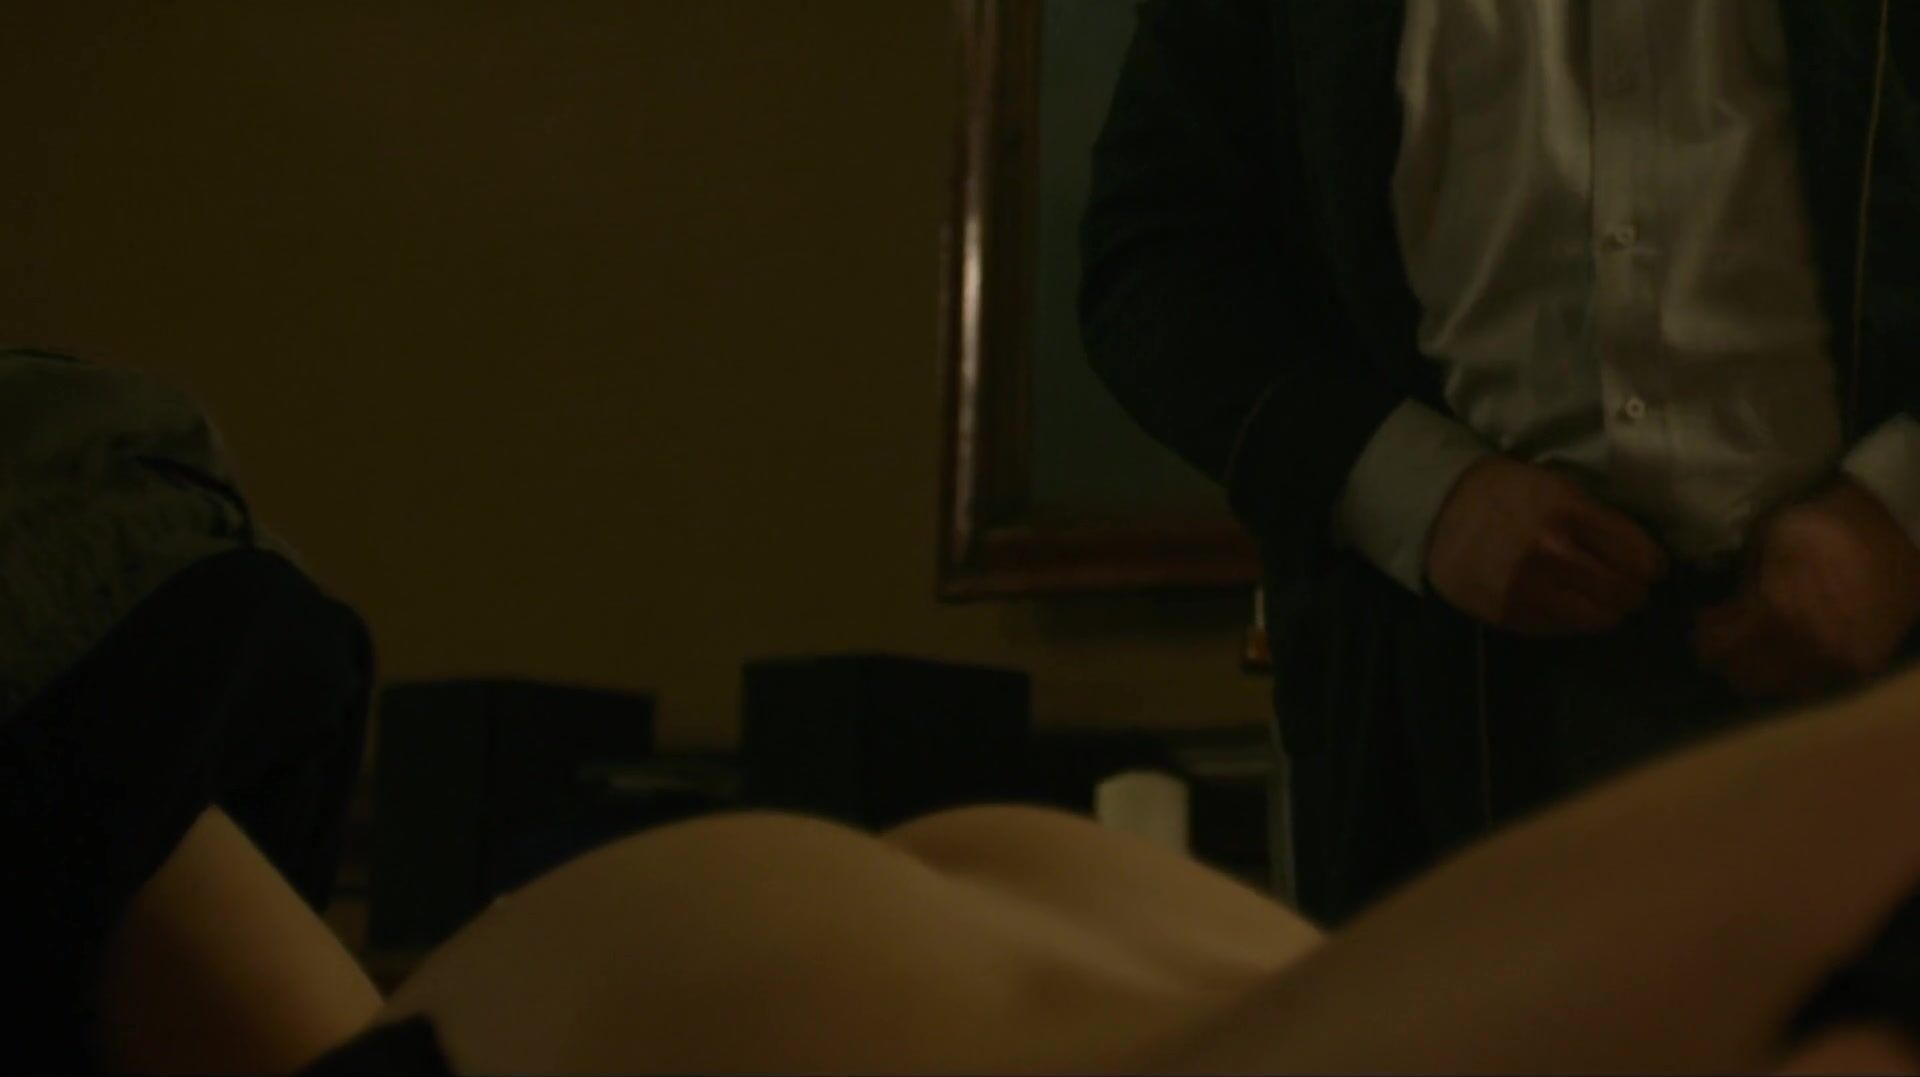 Phun Men hump Rooney Mara with her consent or without it in Girl With The Dragon Tattoo Amatures Gone Wild - 1